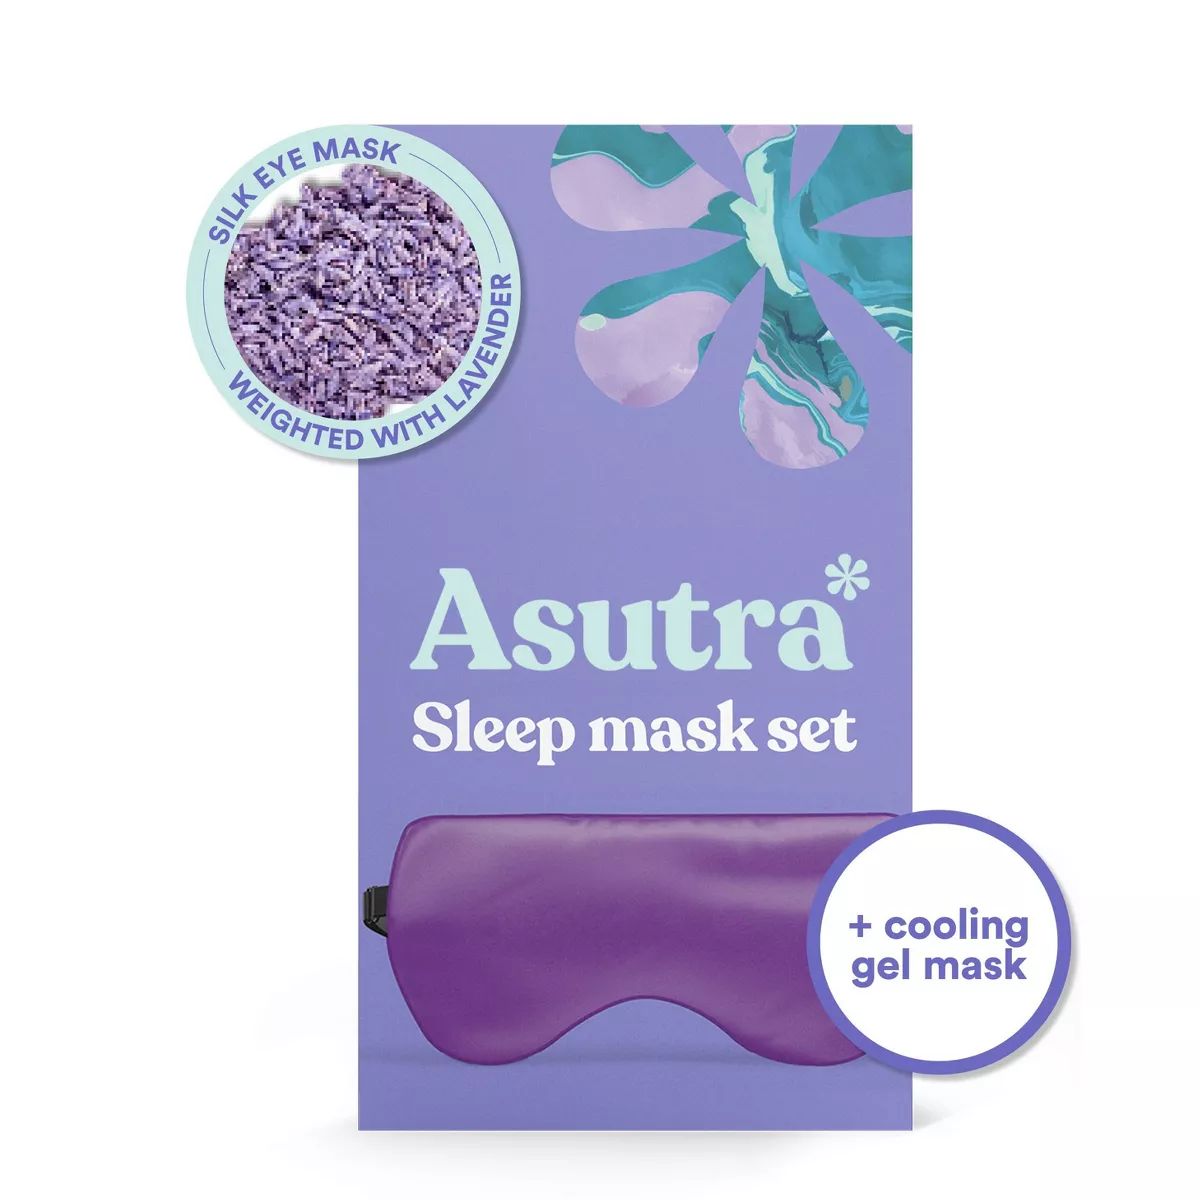 Asutra Natural Sleep Mask Set with Weighted Lavender Silk Eye Pillow & Cooling Gel Mask - 2pc | Target